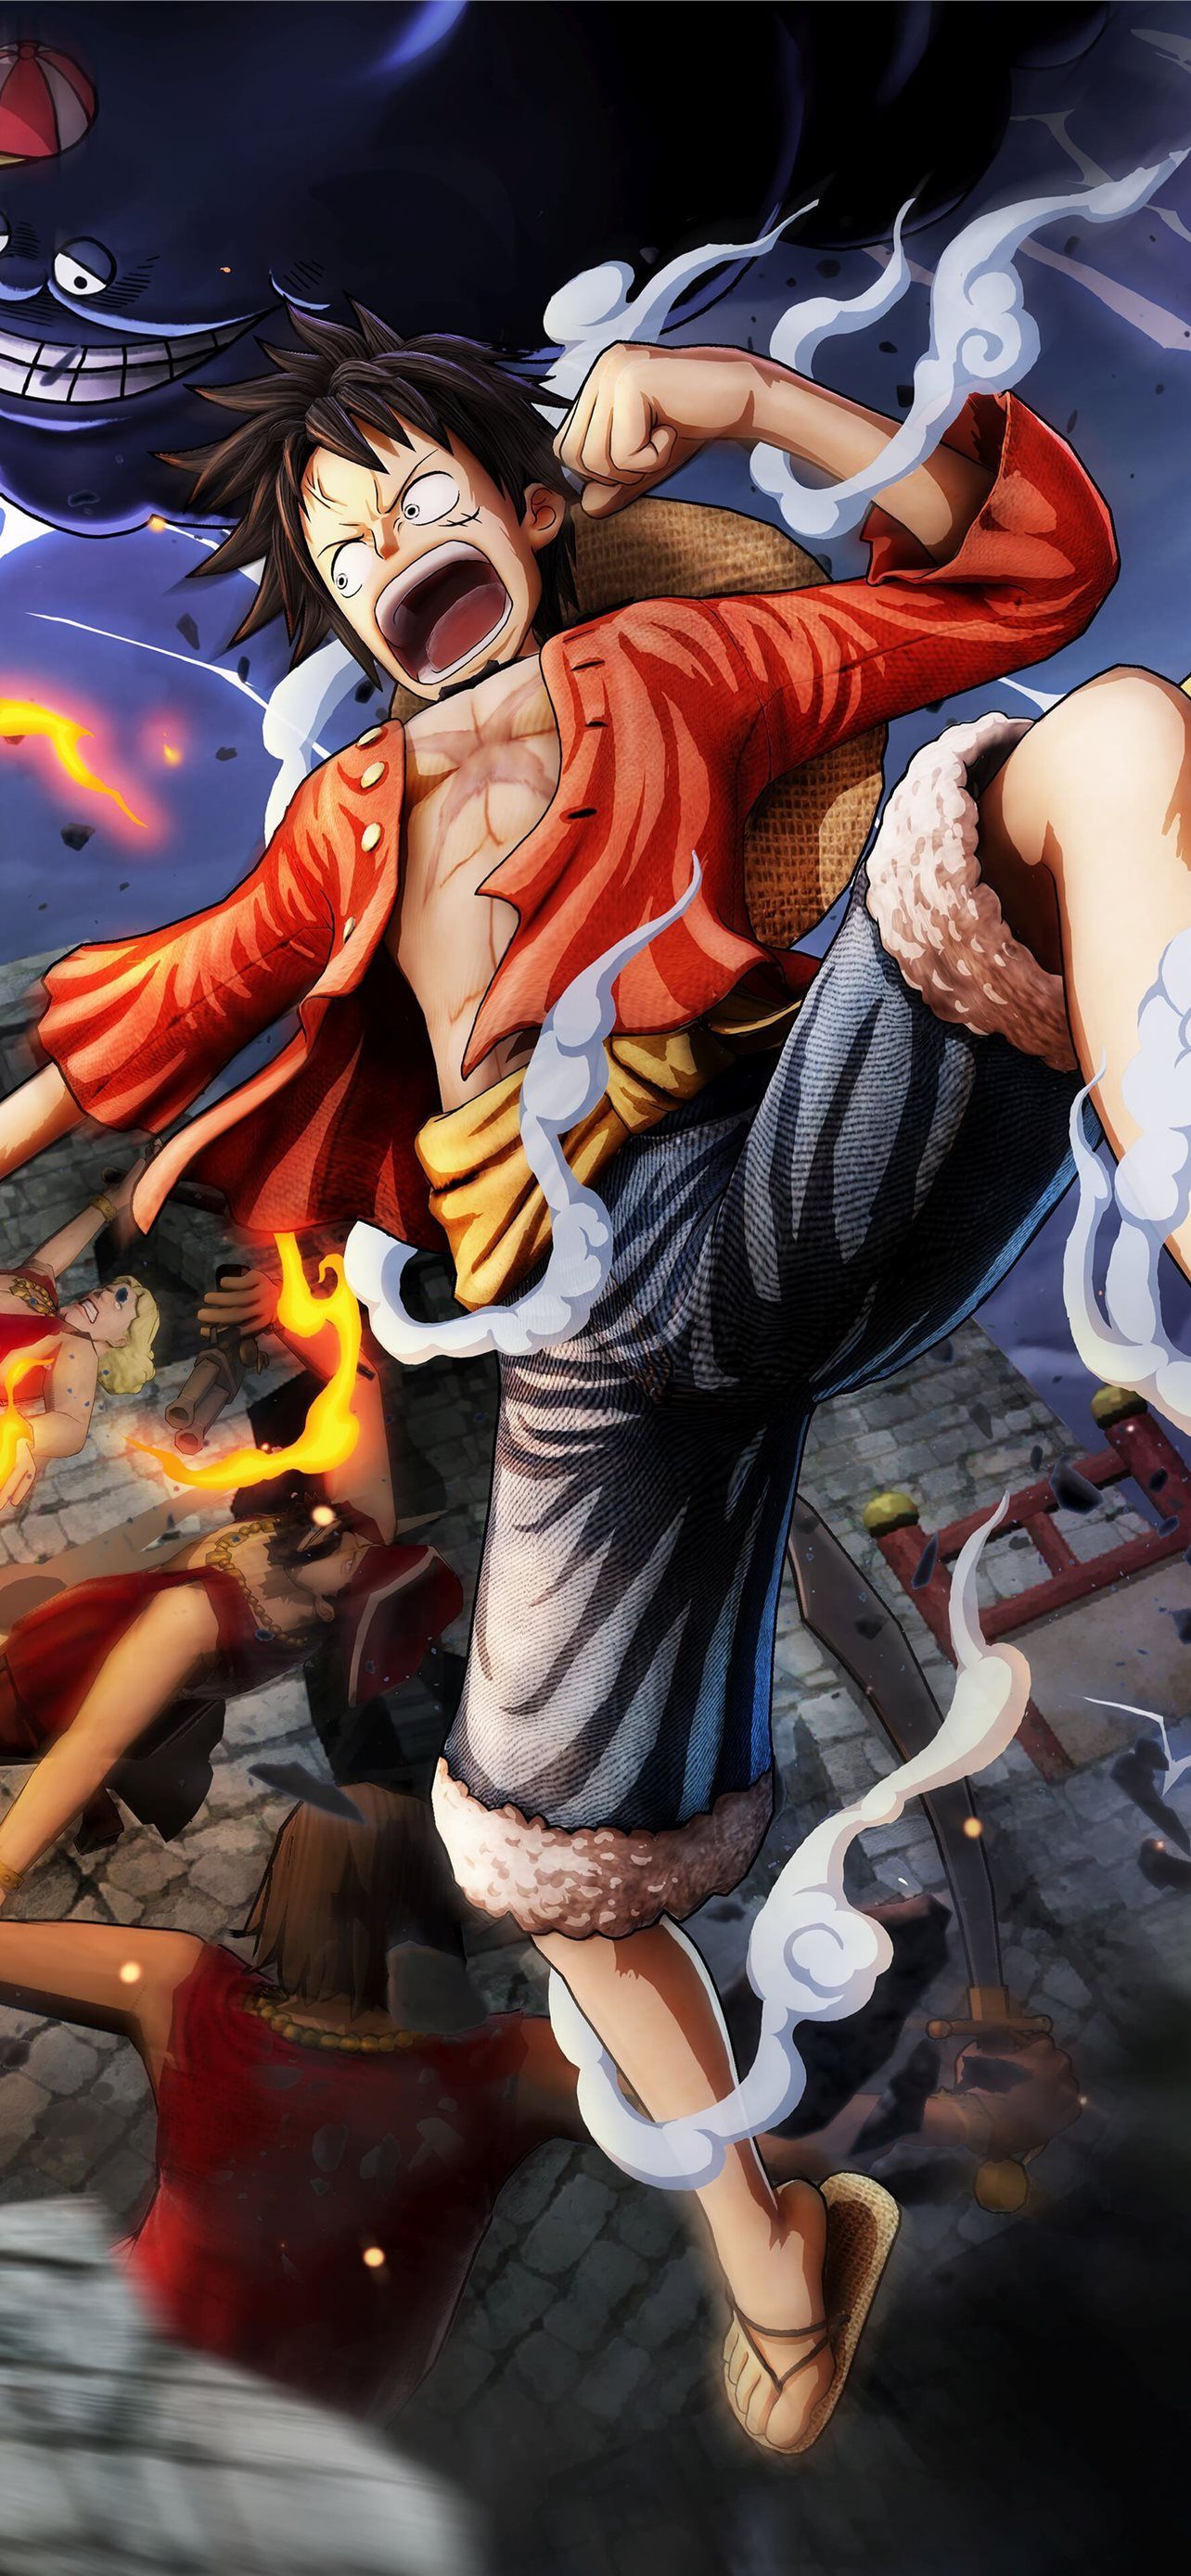 One Piece Luffy iPhone Wallpaper with high-resolution 1080x1920 pixel. You can use this wallpaper for your iPhone 5, 6, 7, 8, X, XS, XR backgrounds, Mobile Screensaver, or iPad Lock Screen - One Piece